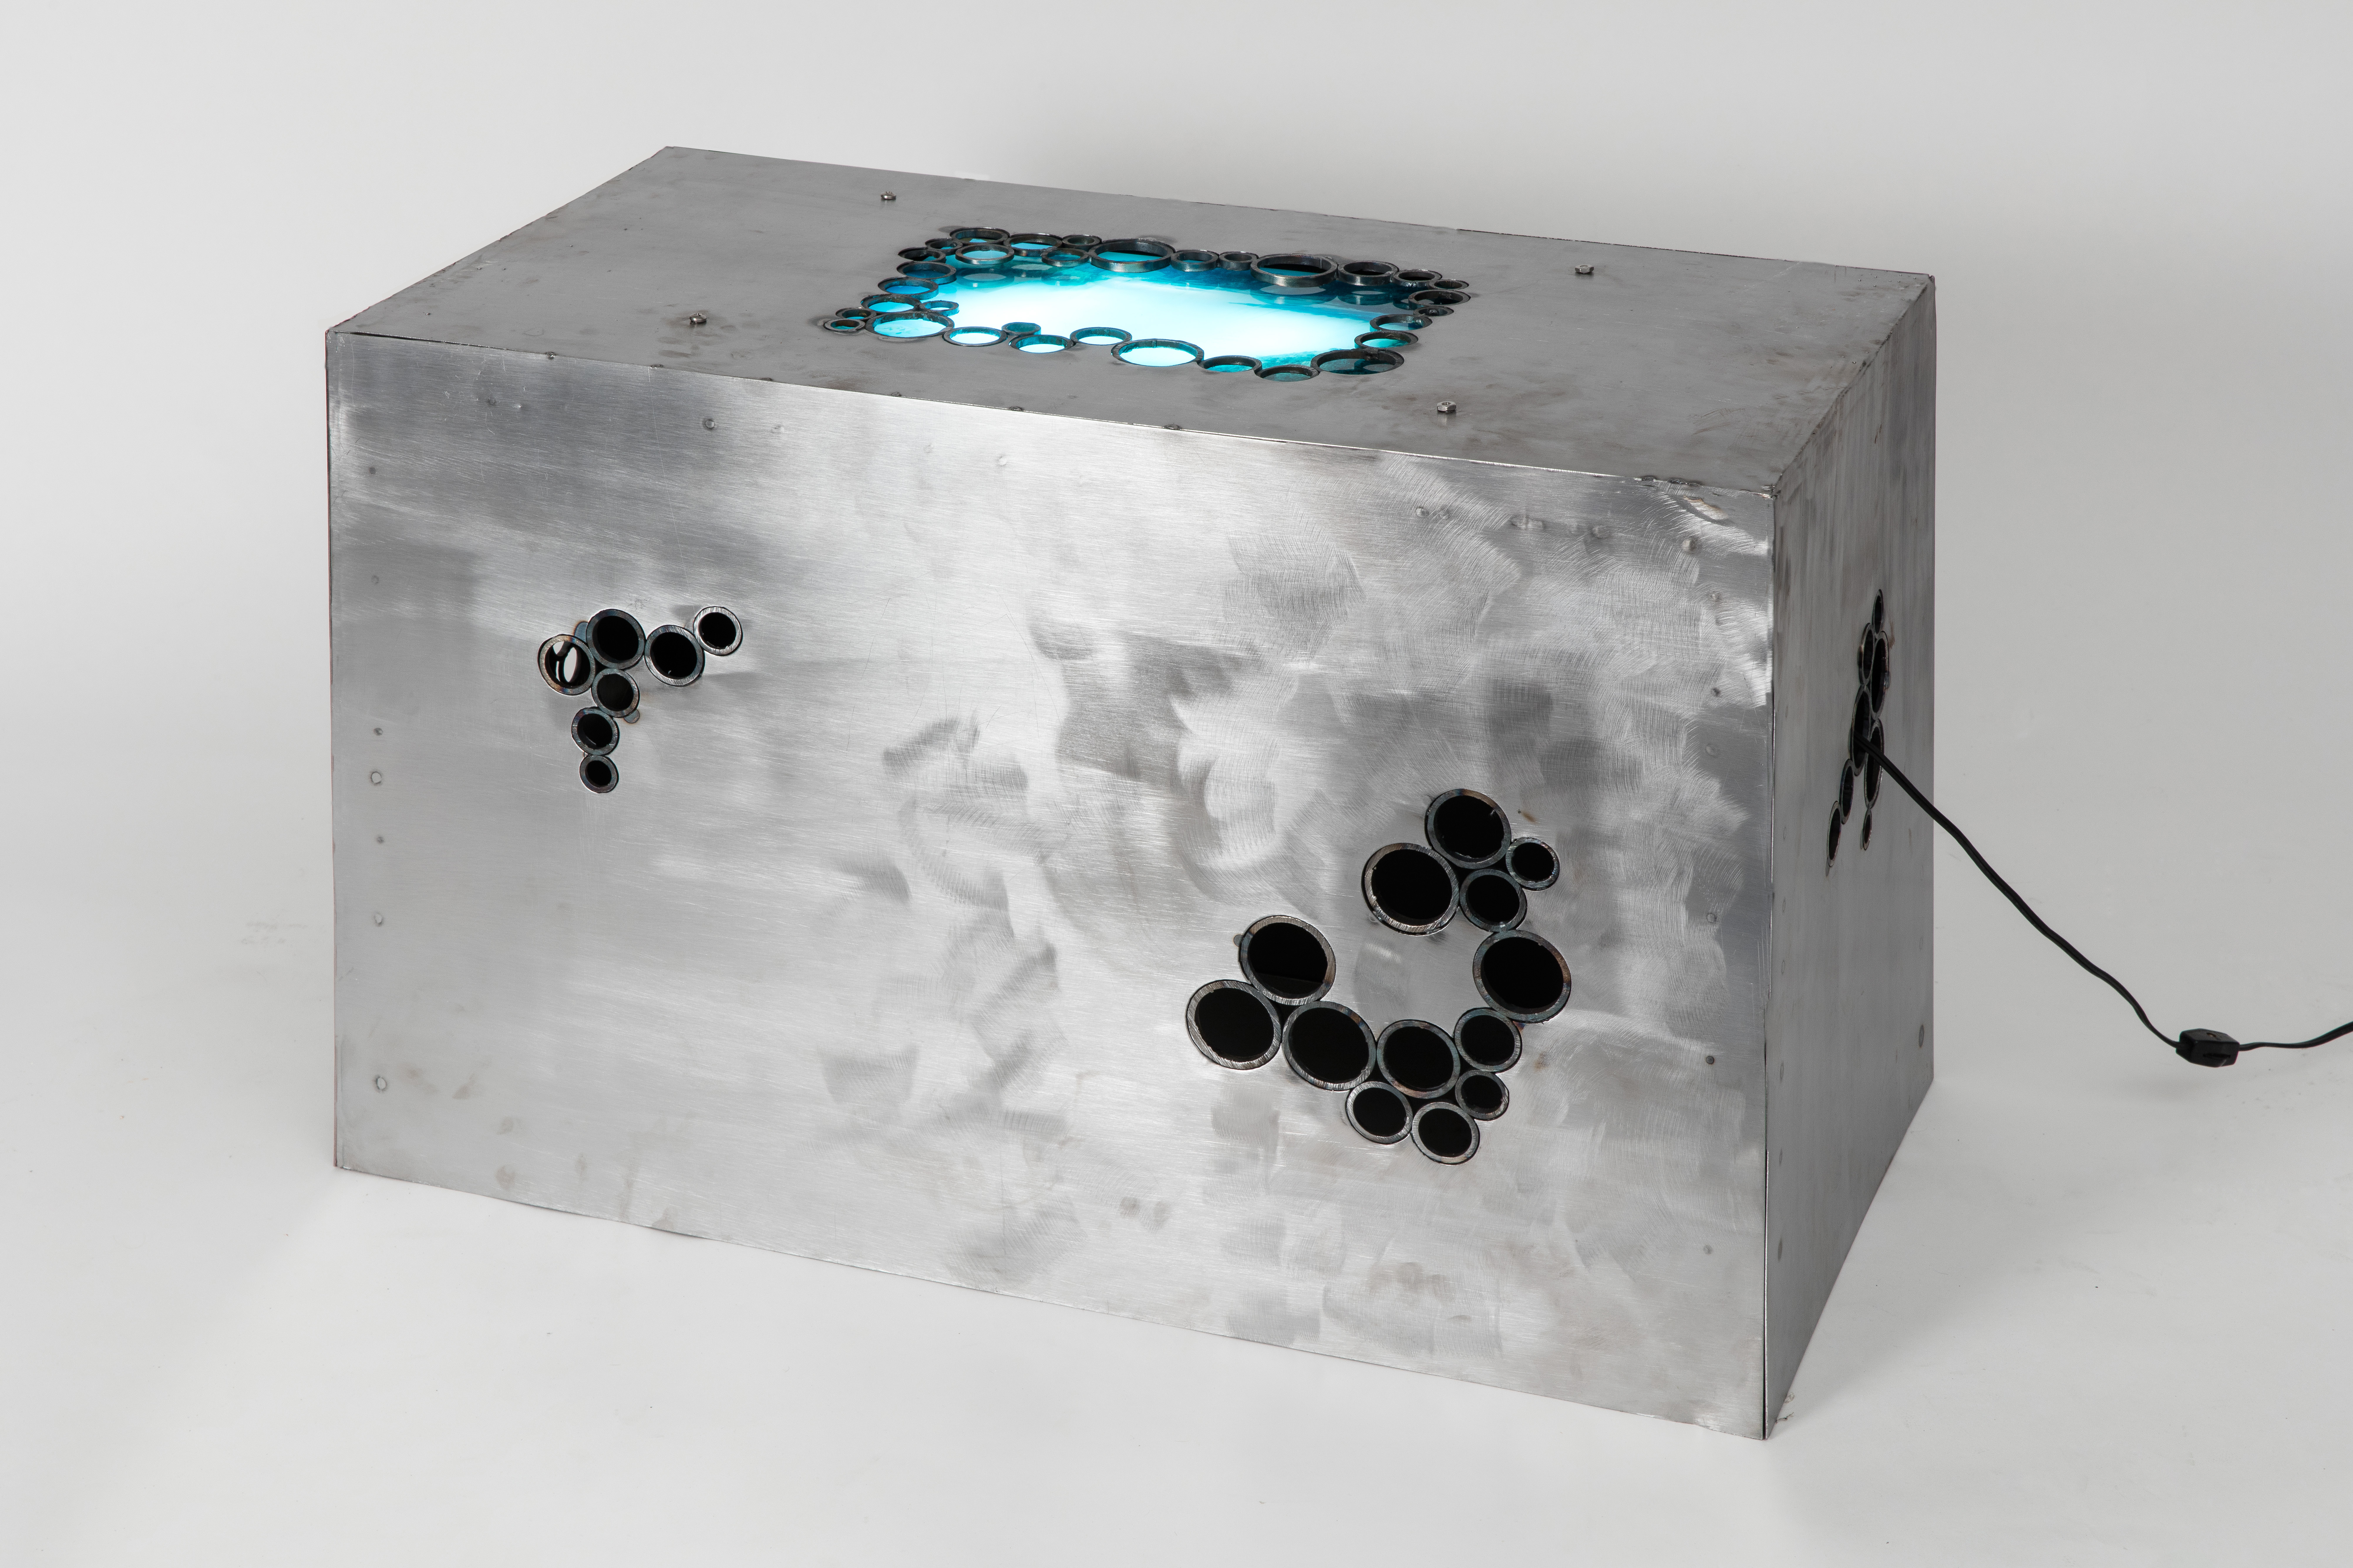 TIG welded, CNC plasma cut coffee table with inset lightbox, 2022.